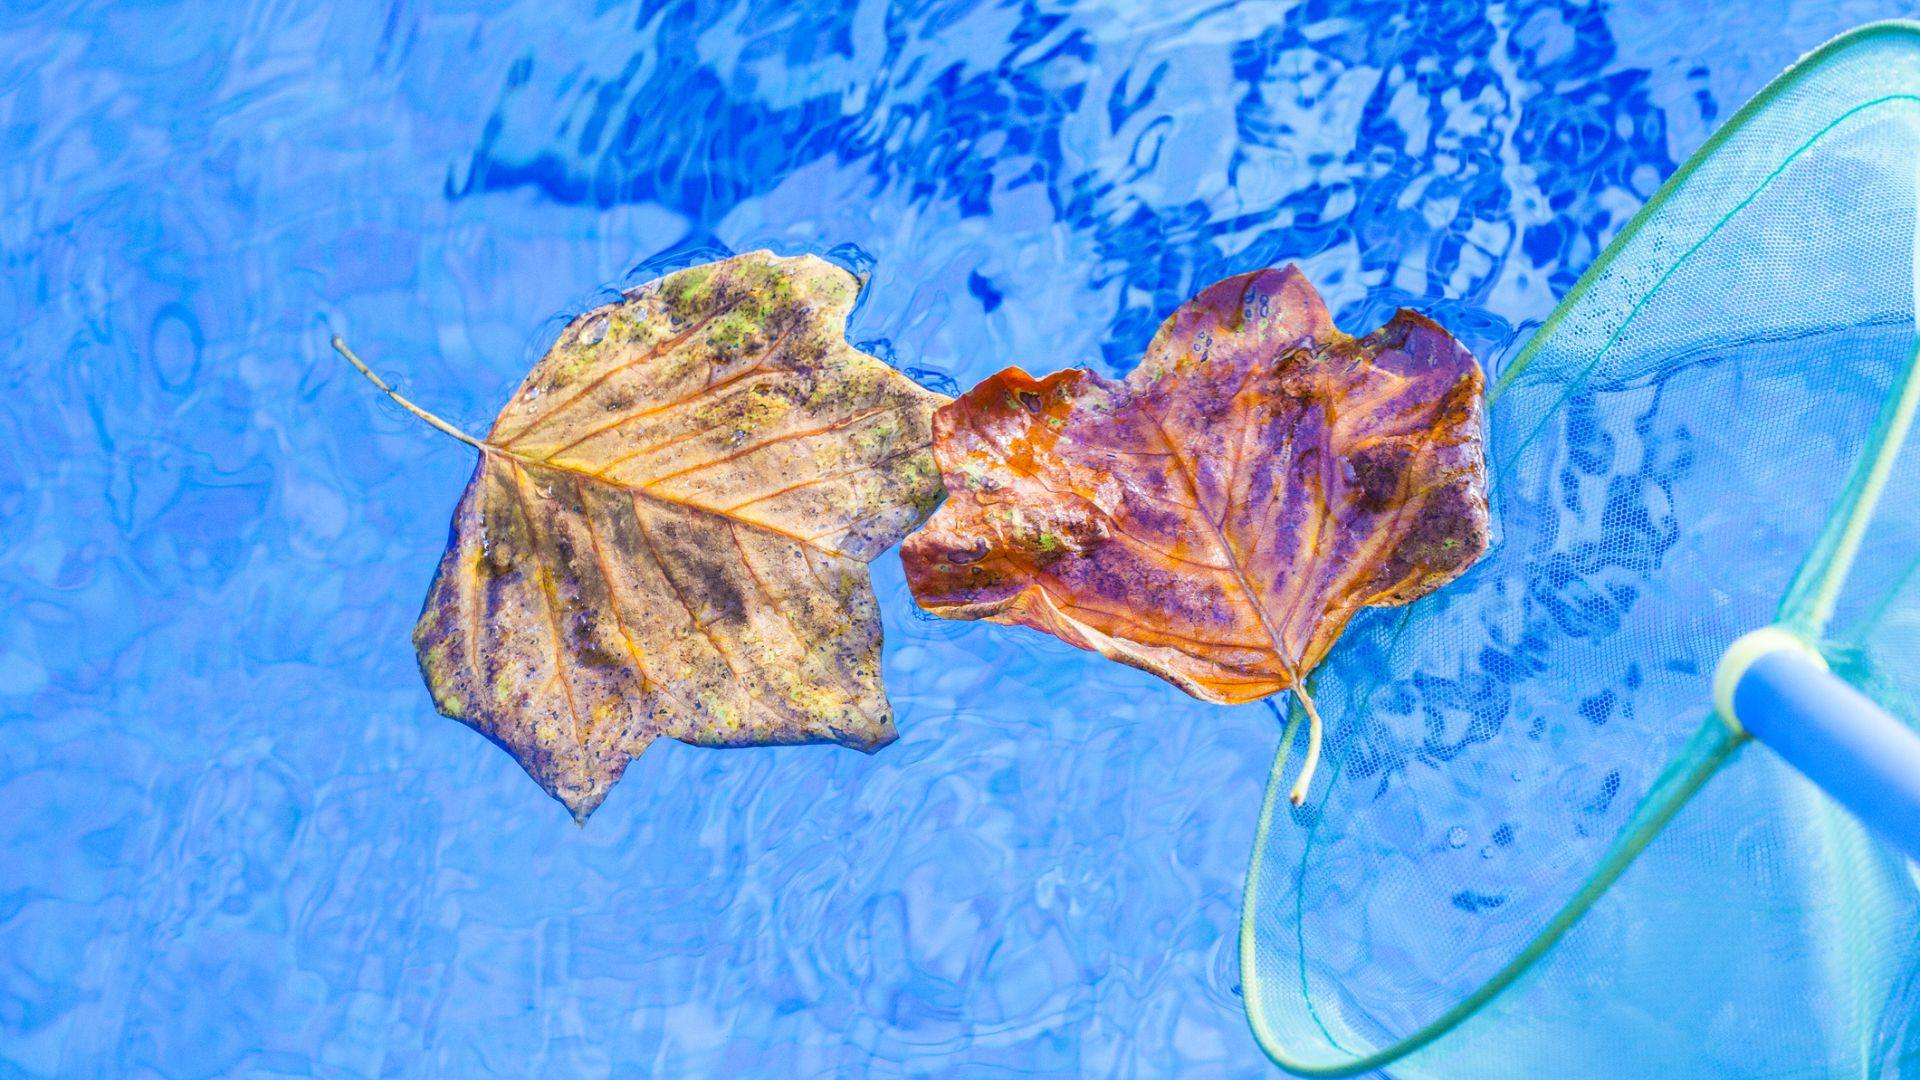 Fall leaves in pool shows it might be the right time to close your pool